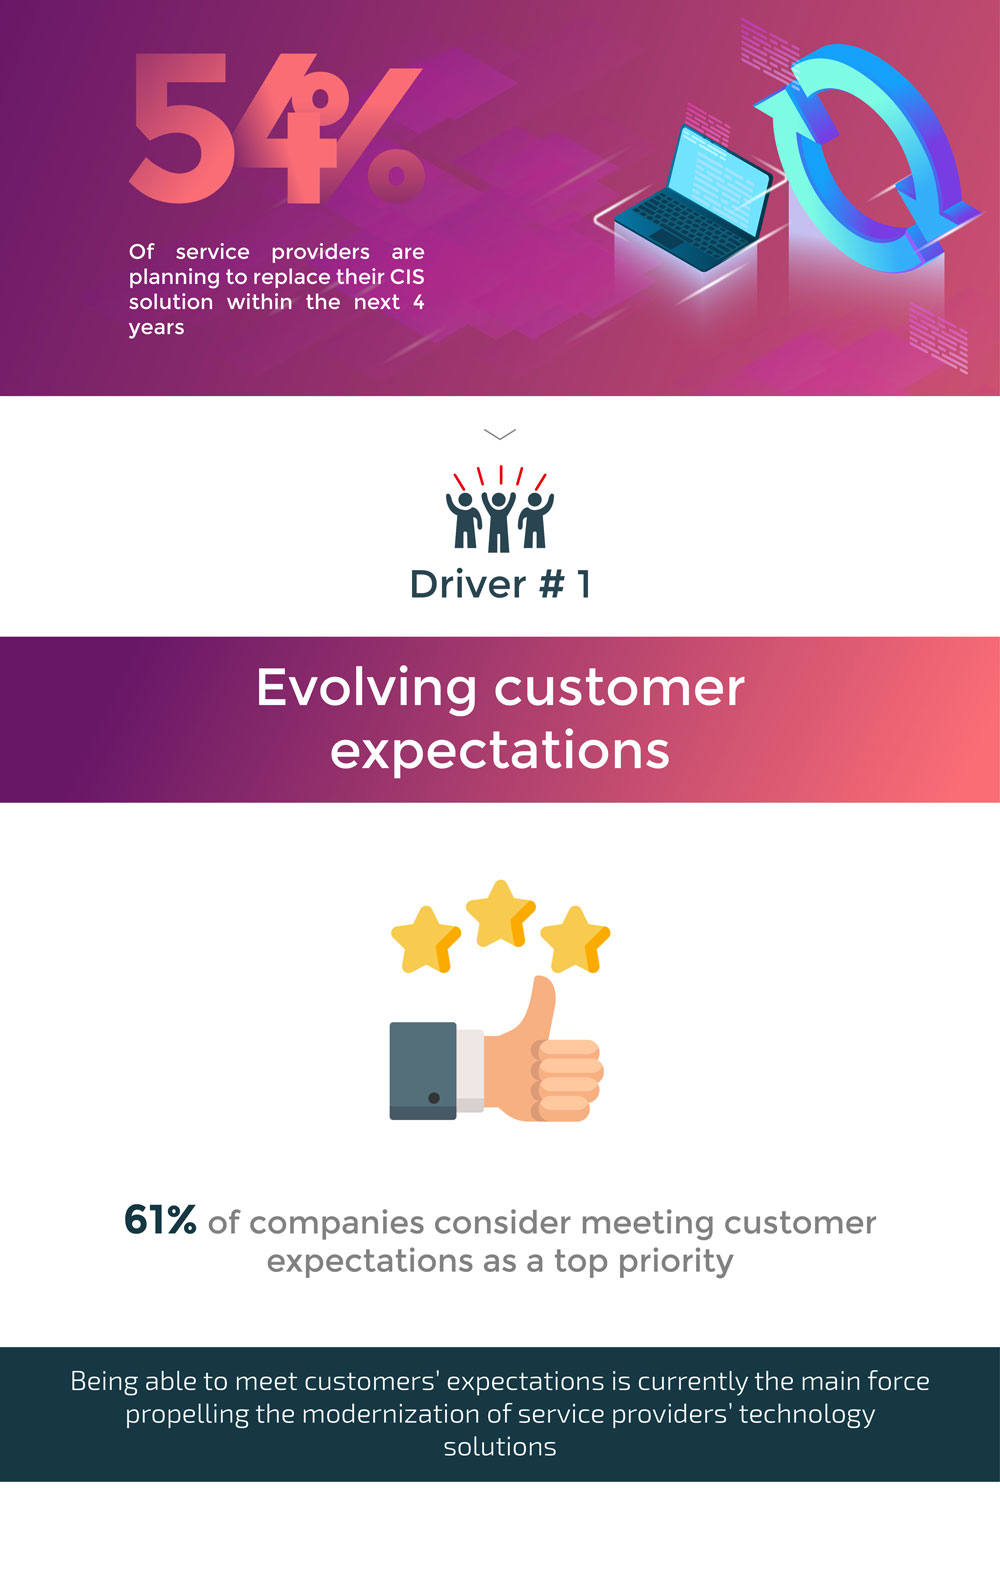 Evolving Customers Expectations